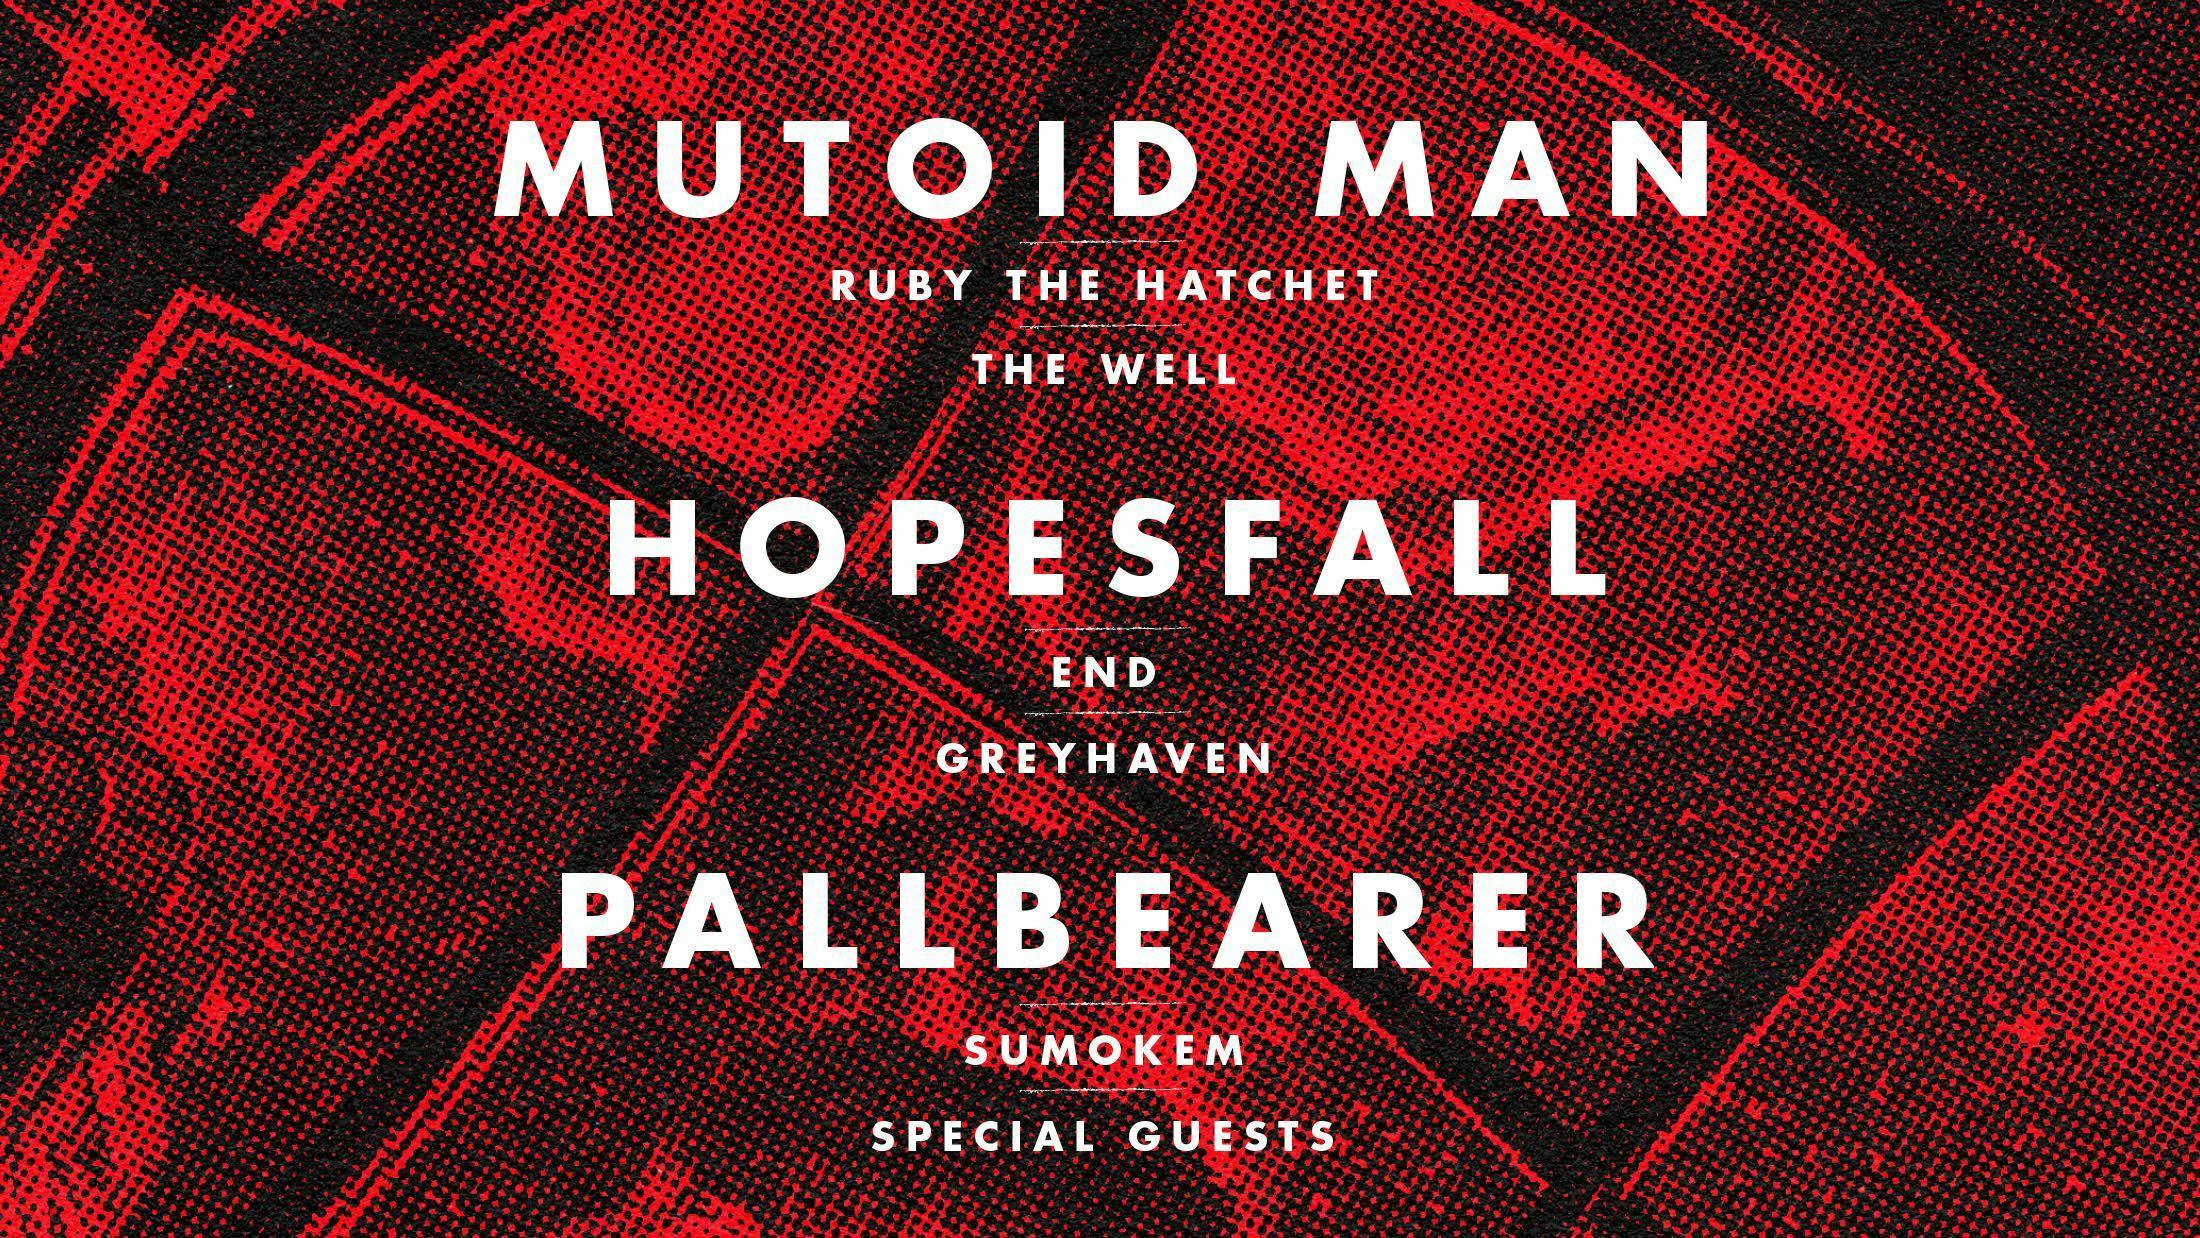 Kerrang! Announces Three Live Shows with Mutoid Man, Hopesfall, and Pallbearer in NYC